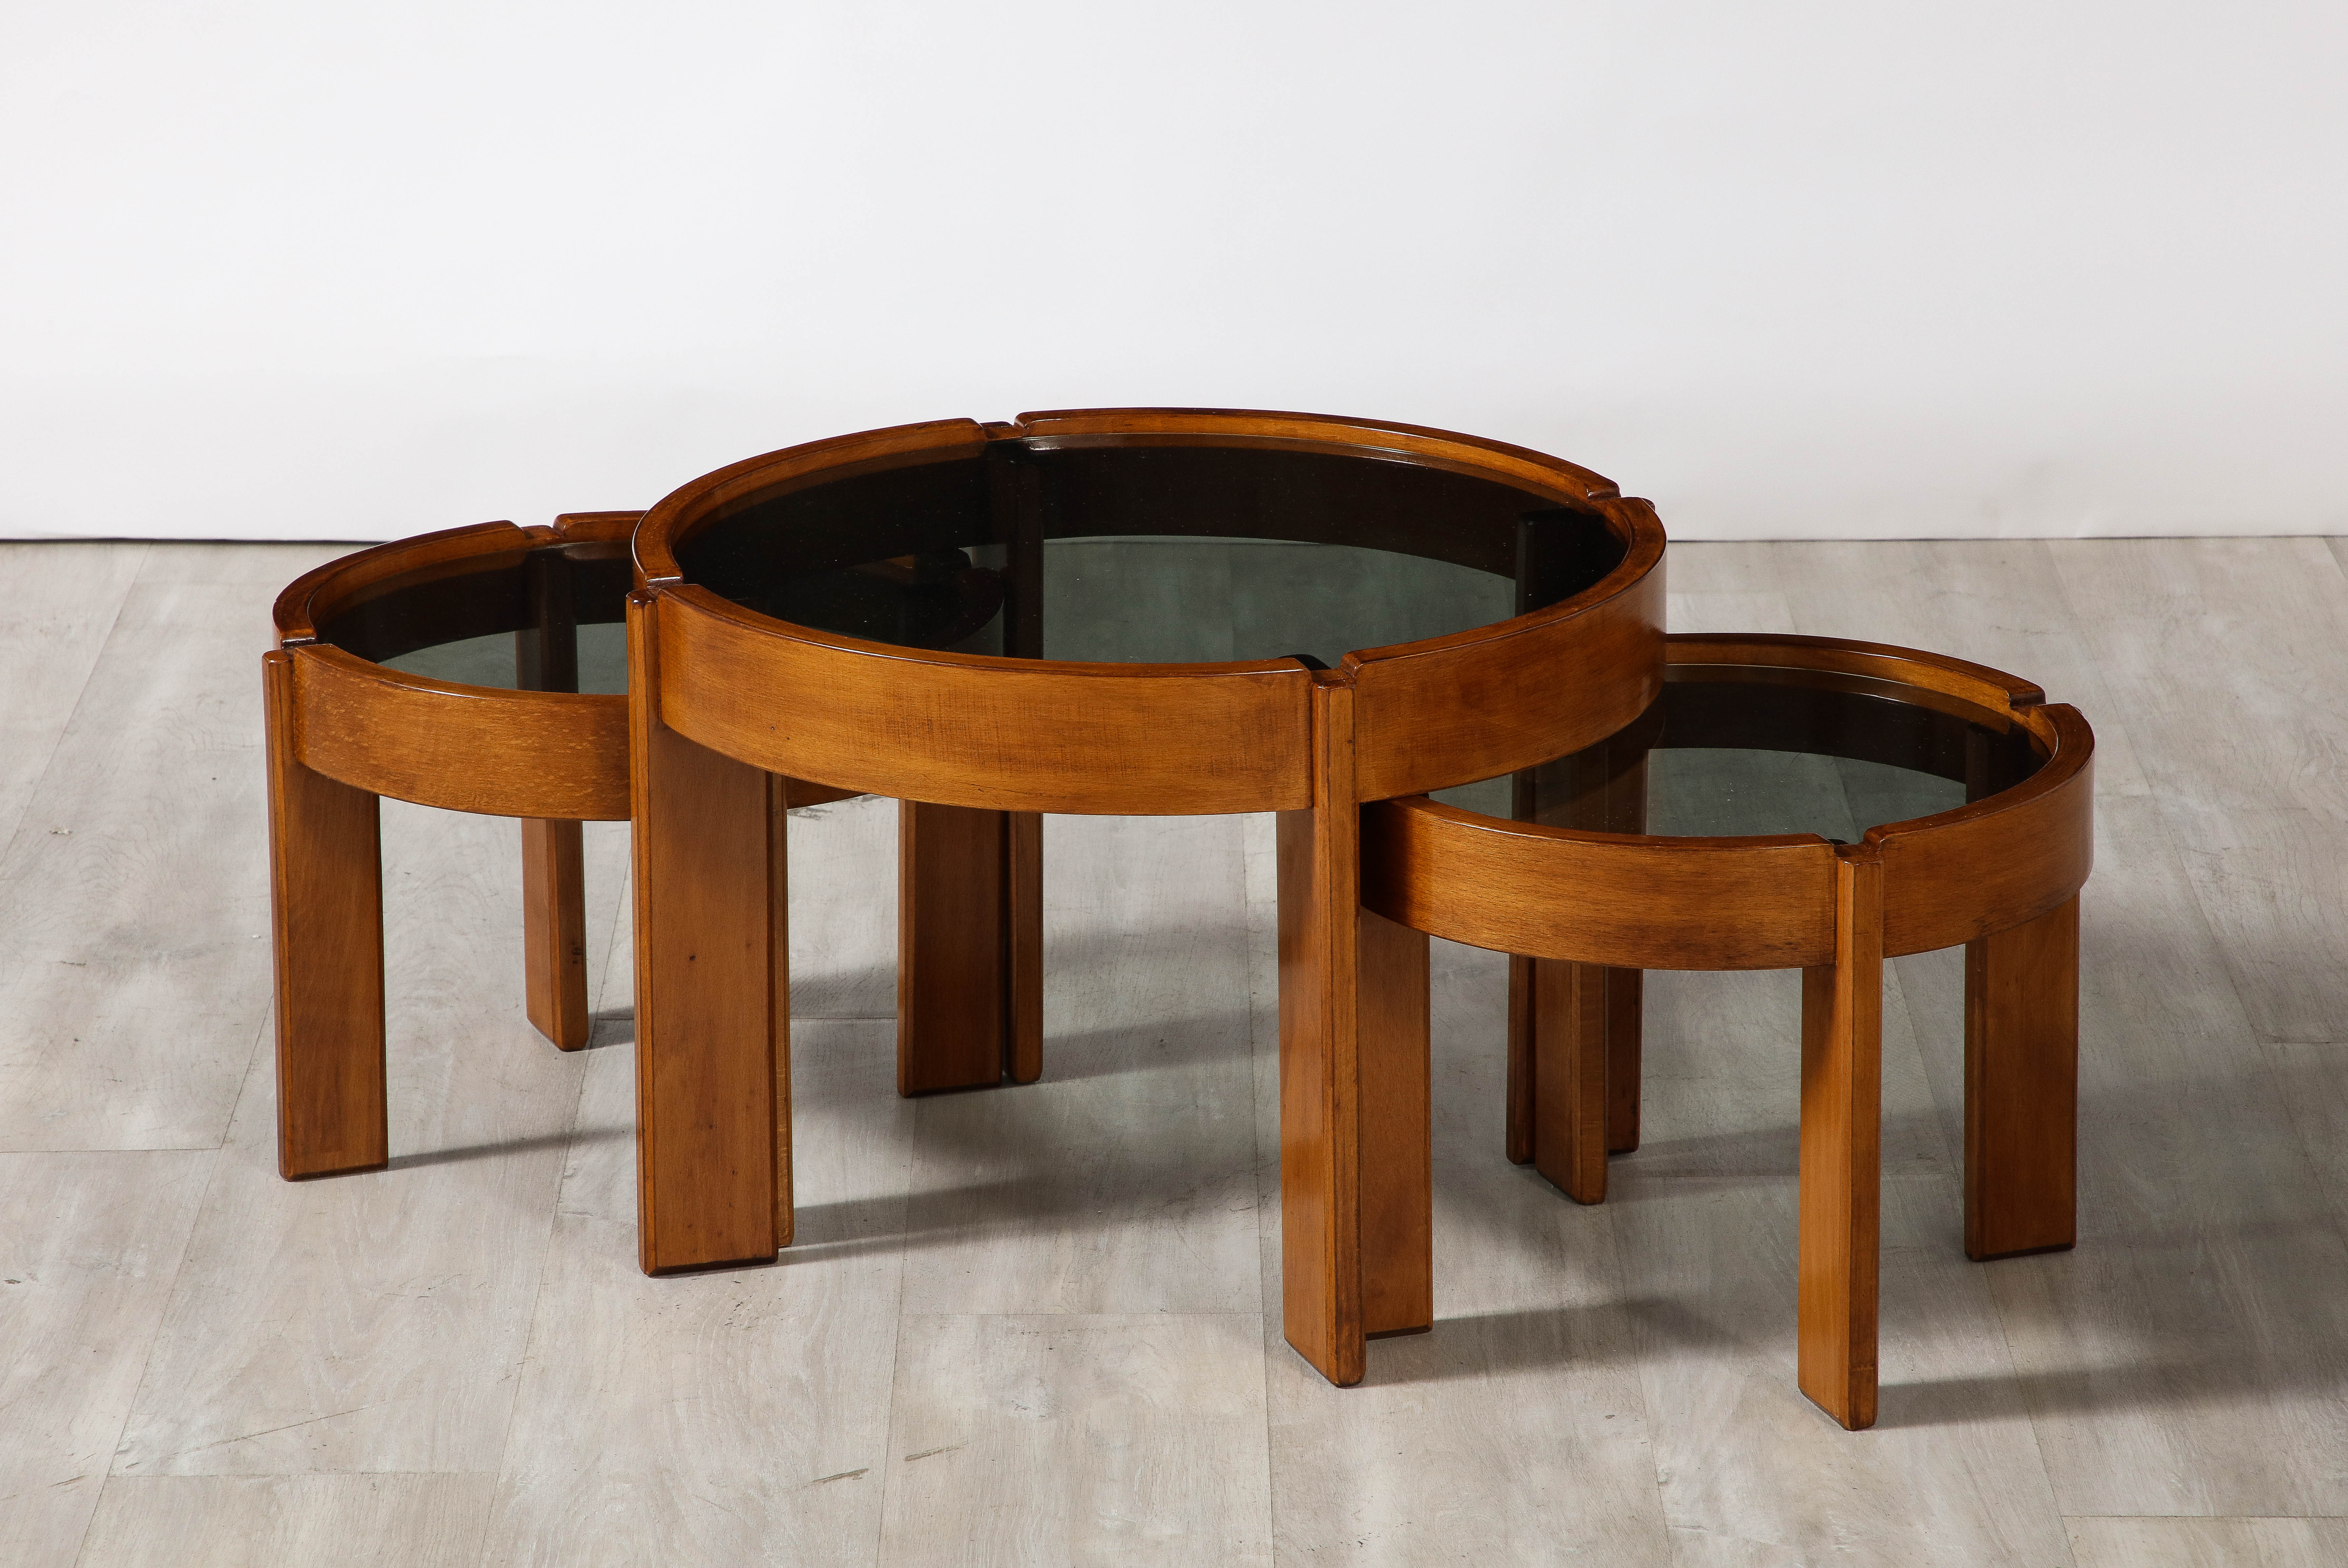 A set of three side/end /coffee tables designed by Gianfranco Frattini for Cassina, late 1960's. Beautiful angled walnut legs with inset smoked glass circular tops. 

By Gianfranco Frattini for Cassina, circa 1967
Size: 15